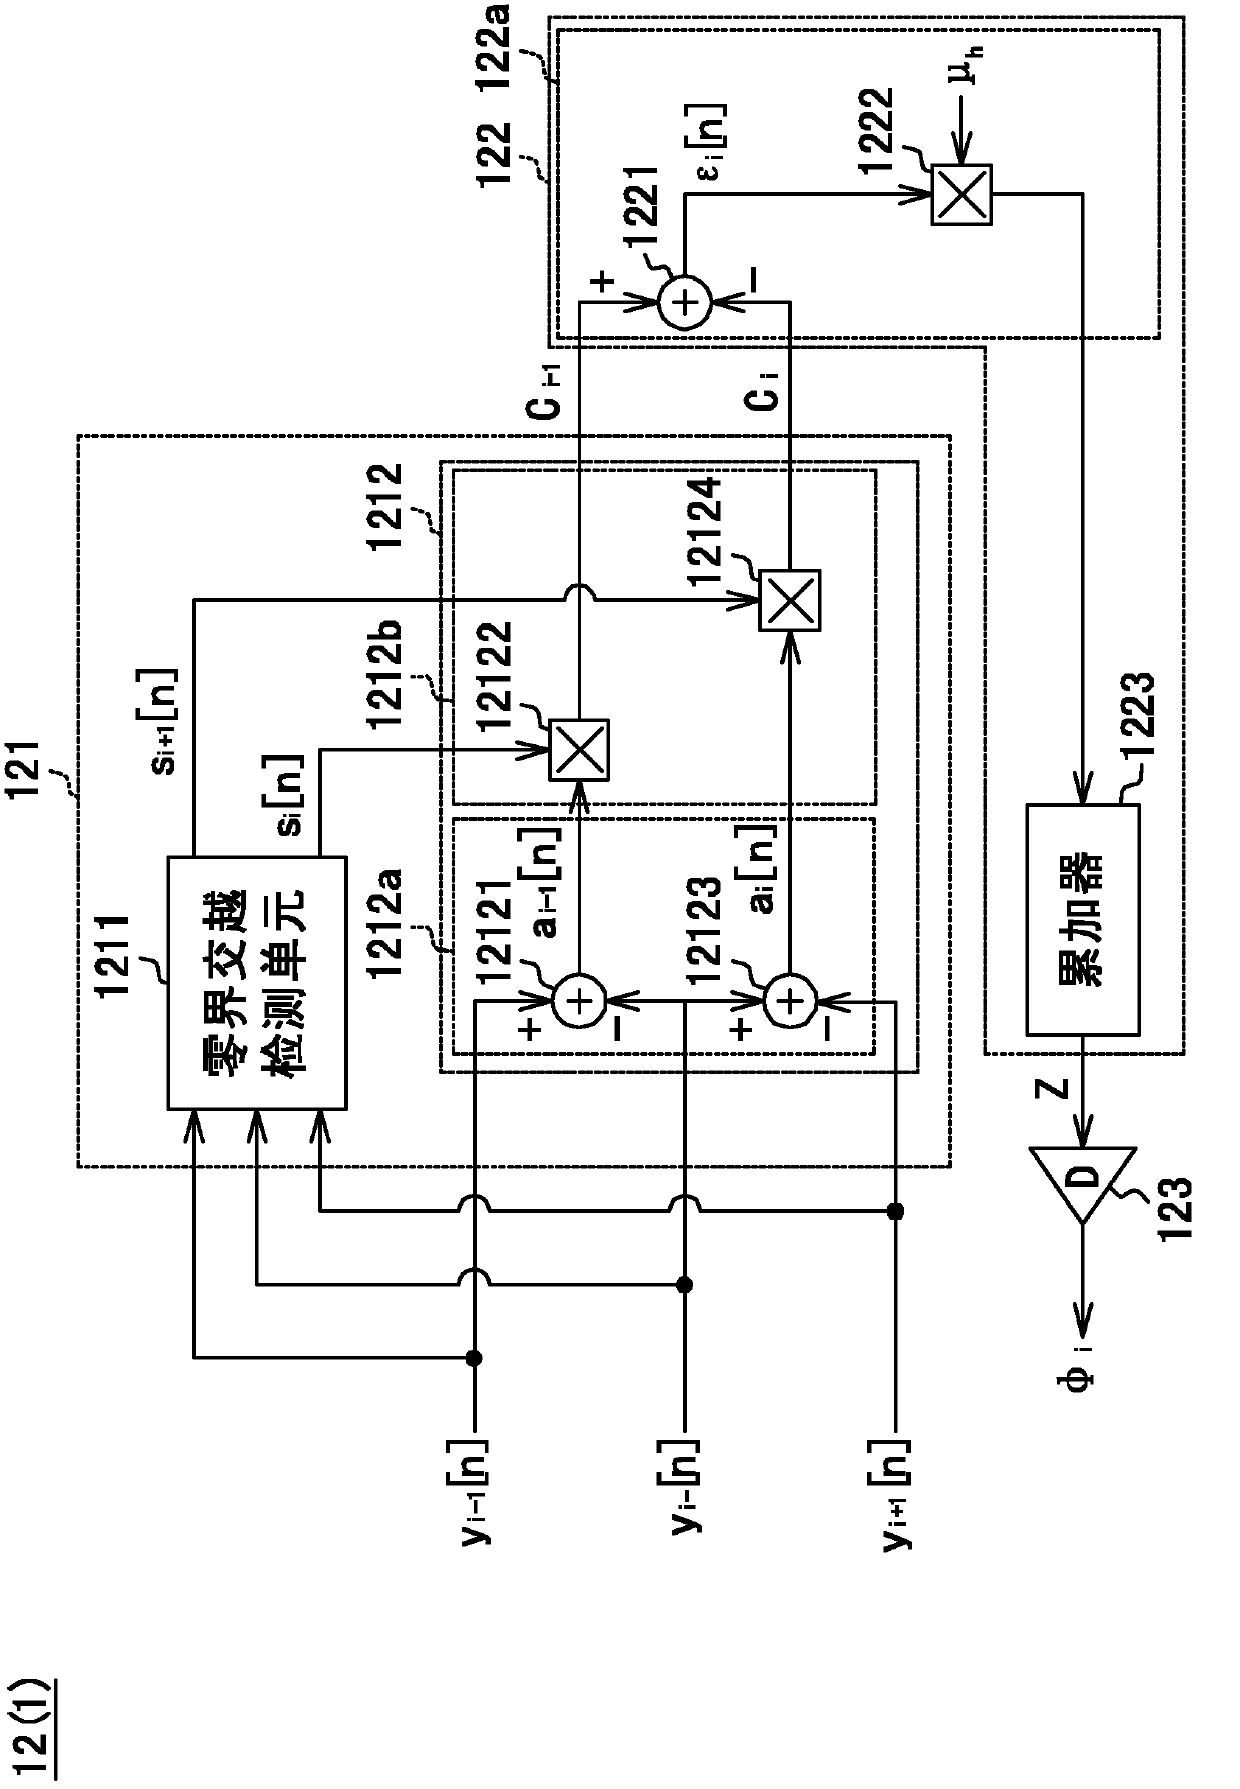 Timing calibration circuit for time-interleaved analog-to-digital converter and method